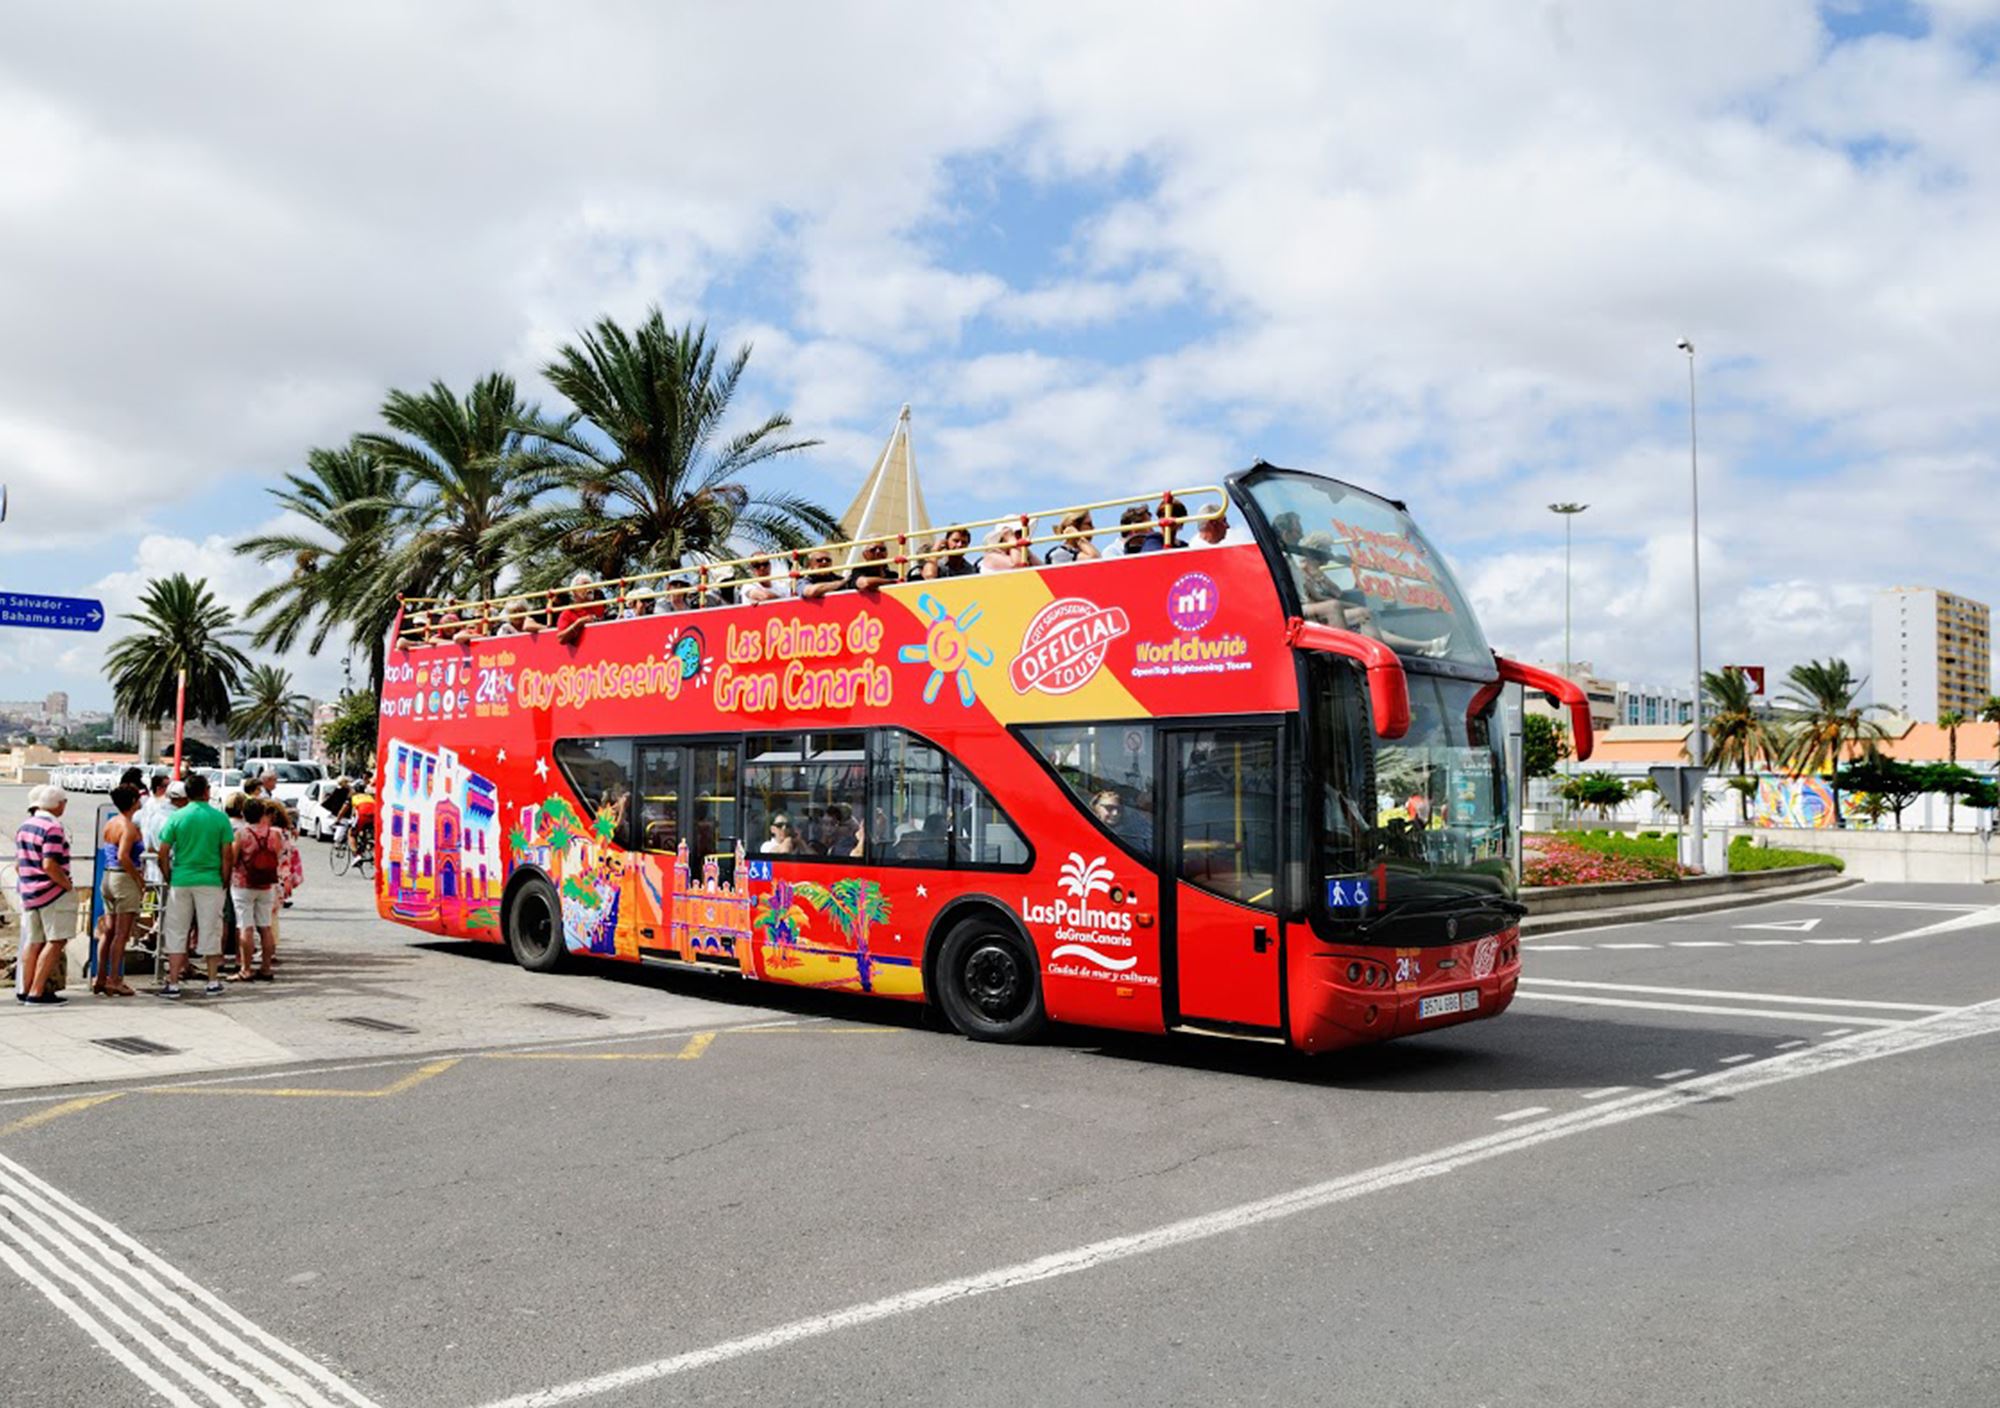 book online get purchase reserve reservation booking buy tickets visits tours Tourist Bus City Sightseeing Las Palmas de Gran Canaria